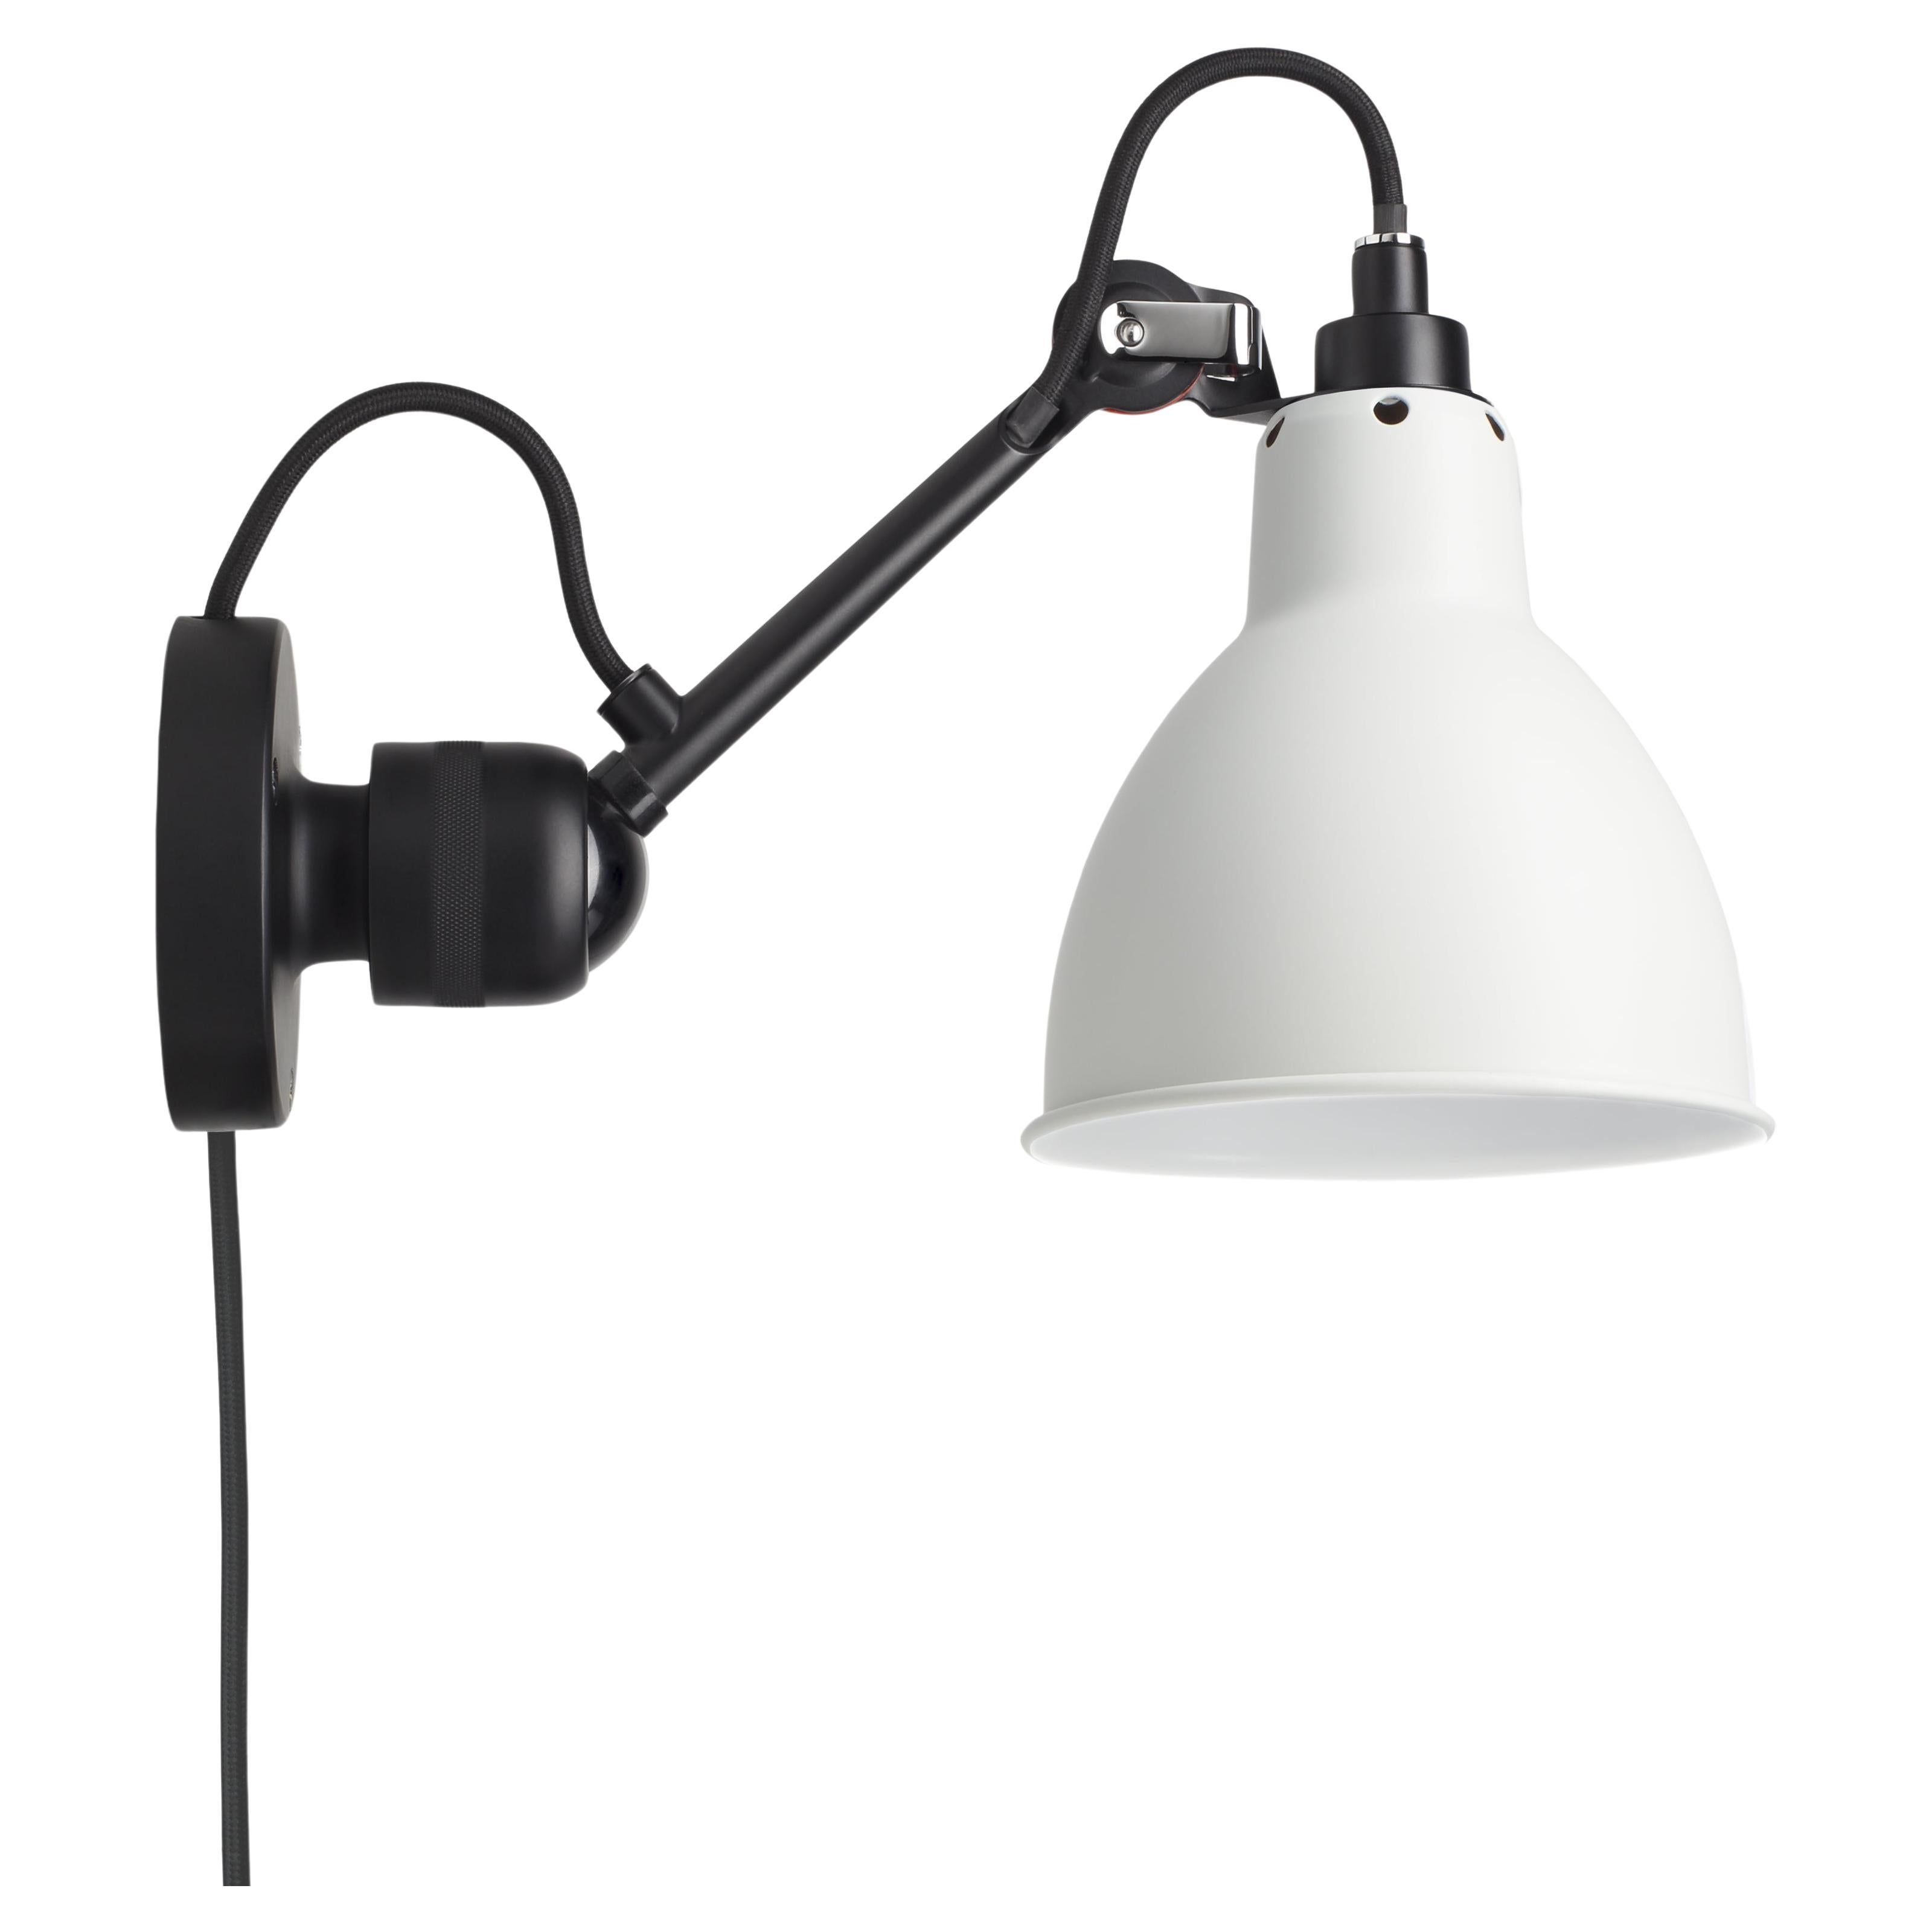 DCW Editions La Lampe Gras N°304 CA Wall Lamp in Black Arm and White Shade For Sale